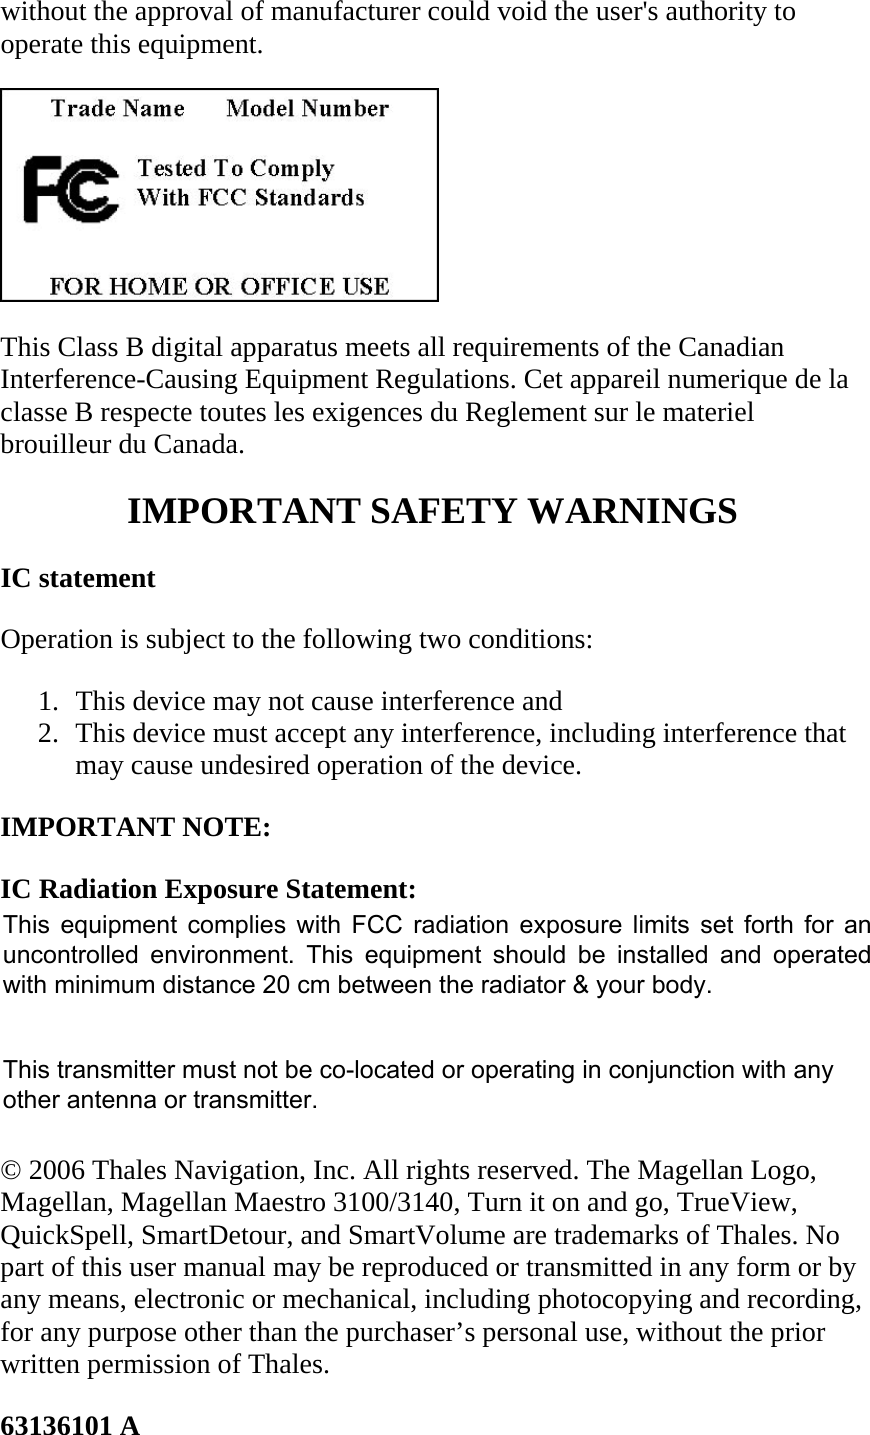 without the approval of manufacturer could void the user&apos;s authority to operate this equipment.   This Class B digital apparatus meets all requirements of the Canadian Interference-Causing Equipment Regulations. Cet appareil numerique de la classe B respecte toutes les exigences du Reglement sur le materiel brouilleur du Canada.  IMPORTANT SAFETY WARNINGS  IC statement  Operation is subject to the following two conditions:  1. This device may not cause interference and  2. This device must accept any interference, including interference that may cause undesired operation of the device.  IMPORTANT NOTE:  IC Radiation Exposure Statement:  This equipment complies with IC radiation exposure limits set forth for an uncontrolled environment. End users must follow the specific operating instructions for satisfying RF exposure compliance.  This transmitter must not be co-located or operating in conjunction with any other antenna or transmitter.  © 2006 Thales Navigation, Inc. All rights reserved. The Magellan Logo, Magellan, Magellan Maestro 3100/3140, Turn it on and go, TrueView, QuickSpell, SmartDetour, and SmartVolume are trademarks of Thales. No part of this user manual may be reproduced or transmitted in any form or by any means, electronic or mechanical, including photocopying and recording, for any purpose other than the purchaser’s personal use, without the prior written permission of Thales.  63136101 A  This equipment complies with FCC radiation exposure limits set forth for anuncontrolled  environment.  This equipment  should be  installed  and operatedwith minimum distance 20 cm between the radiator &amp; your body.This transmitter must not be co-located or operating in conjunction with anyother antenna or transmitter.